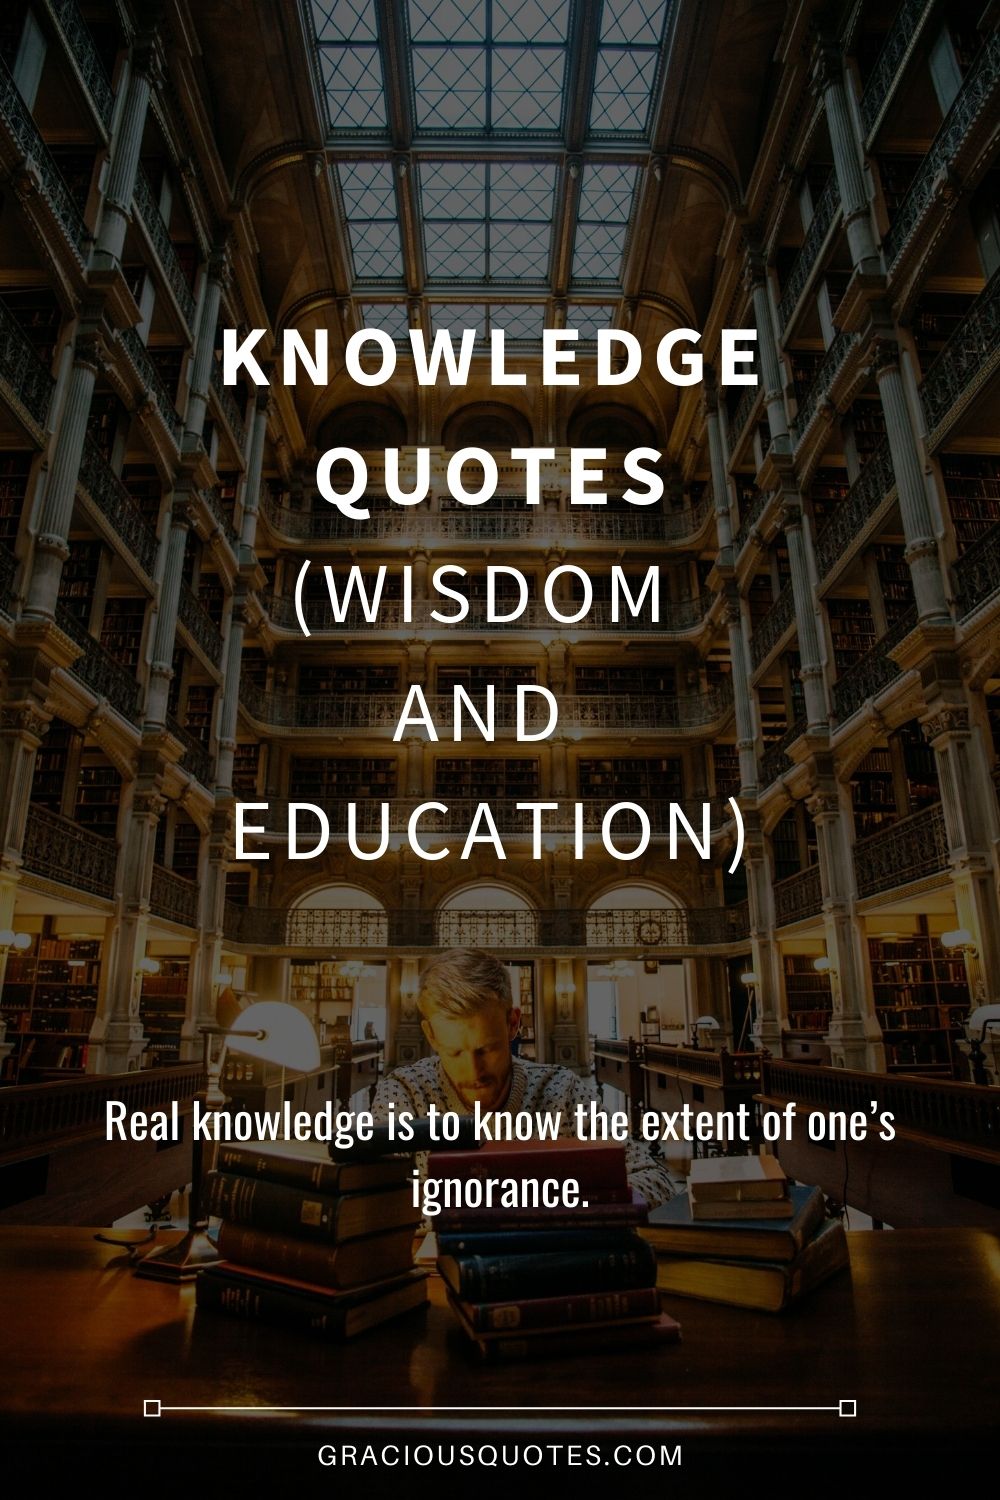 Knowledge Quotes (WISDOM AND EDUCATION) - Gracious Quotes